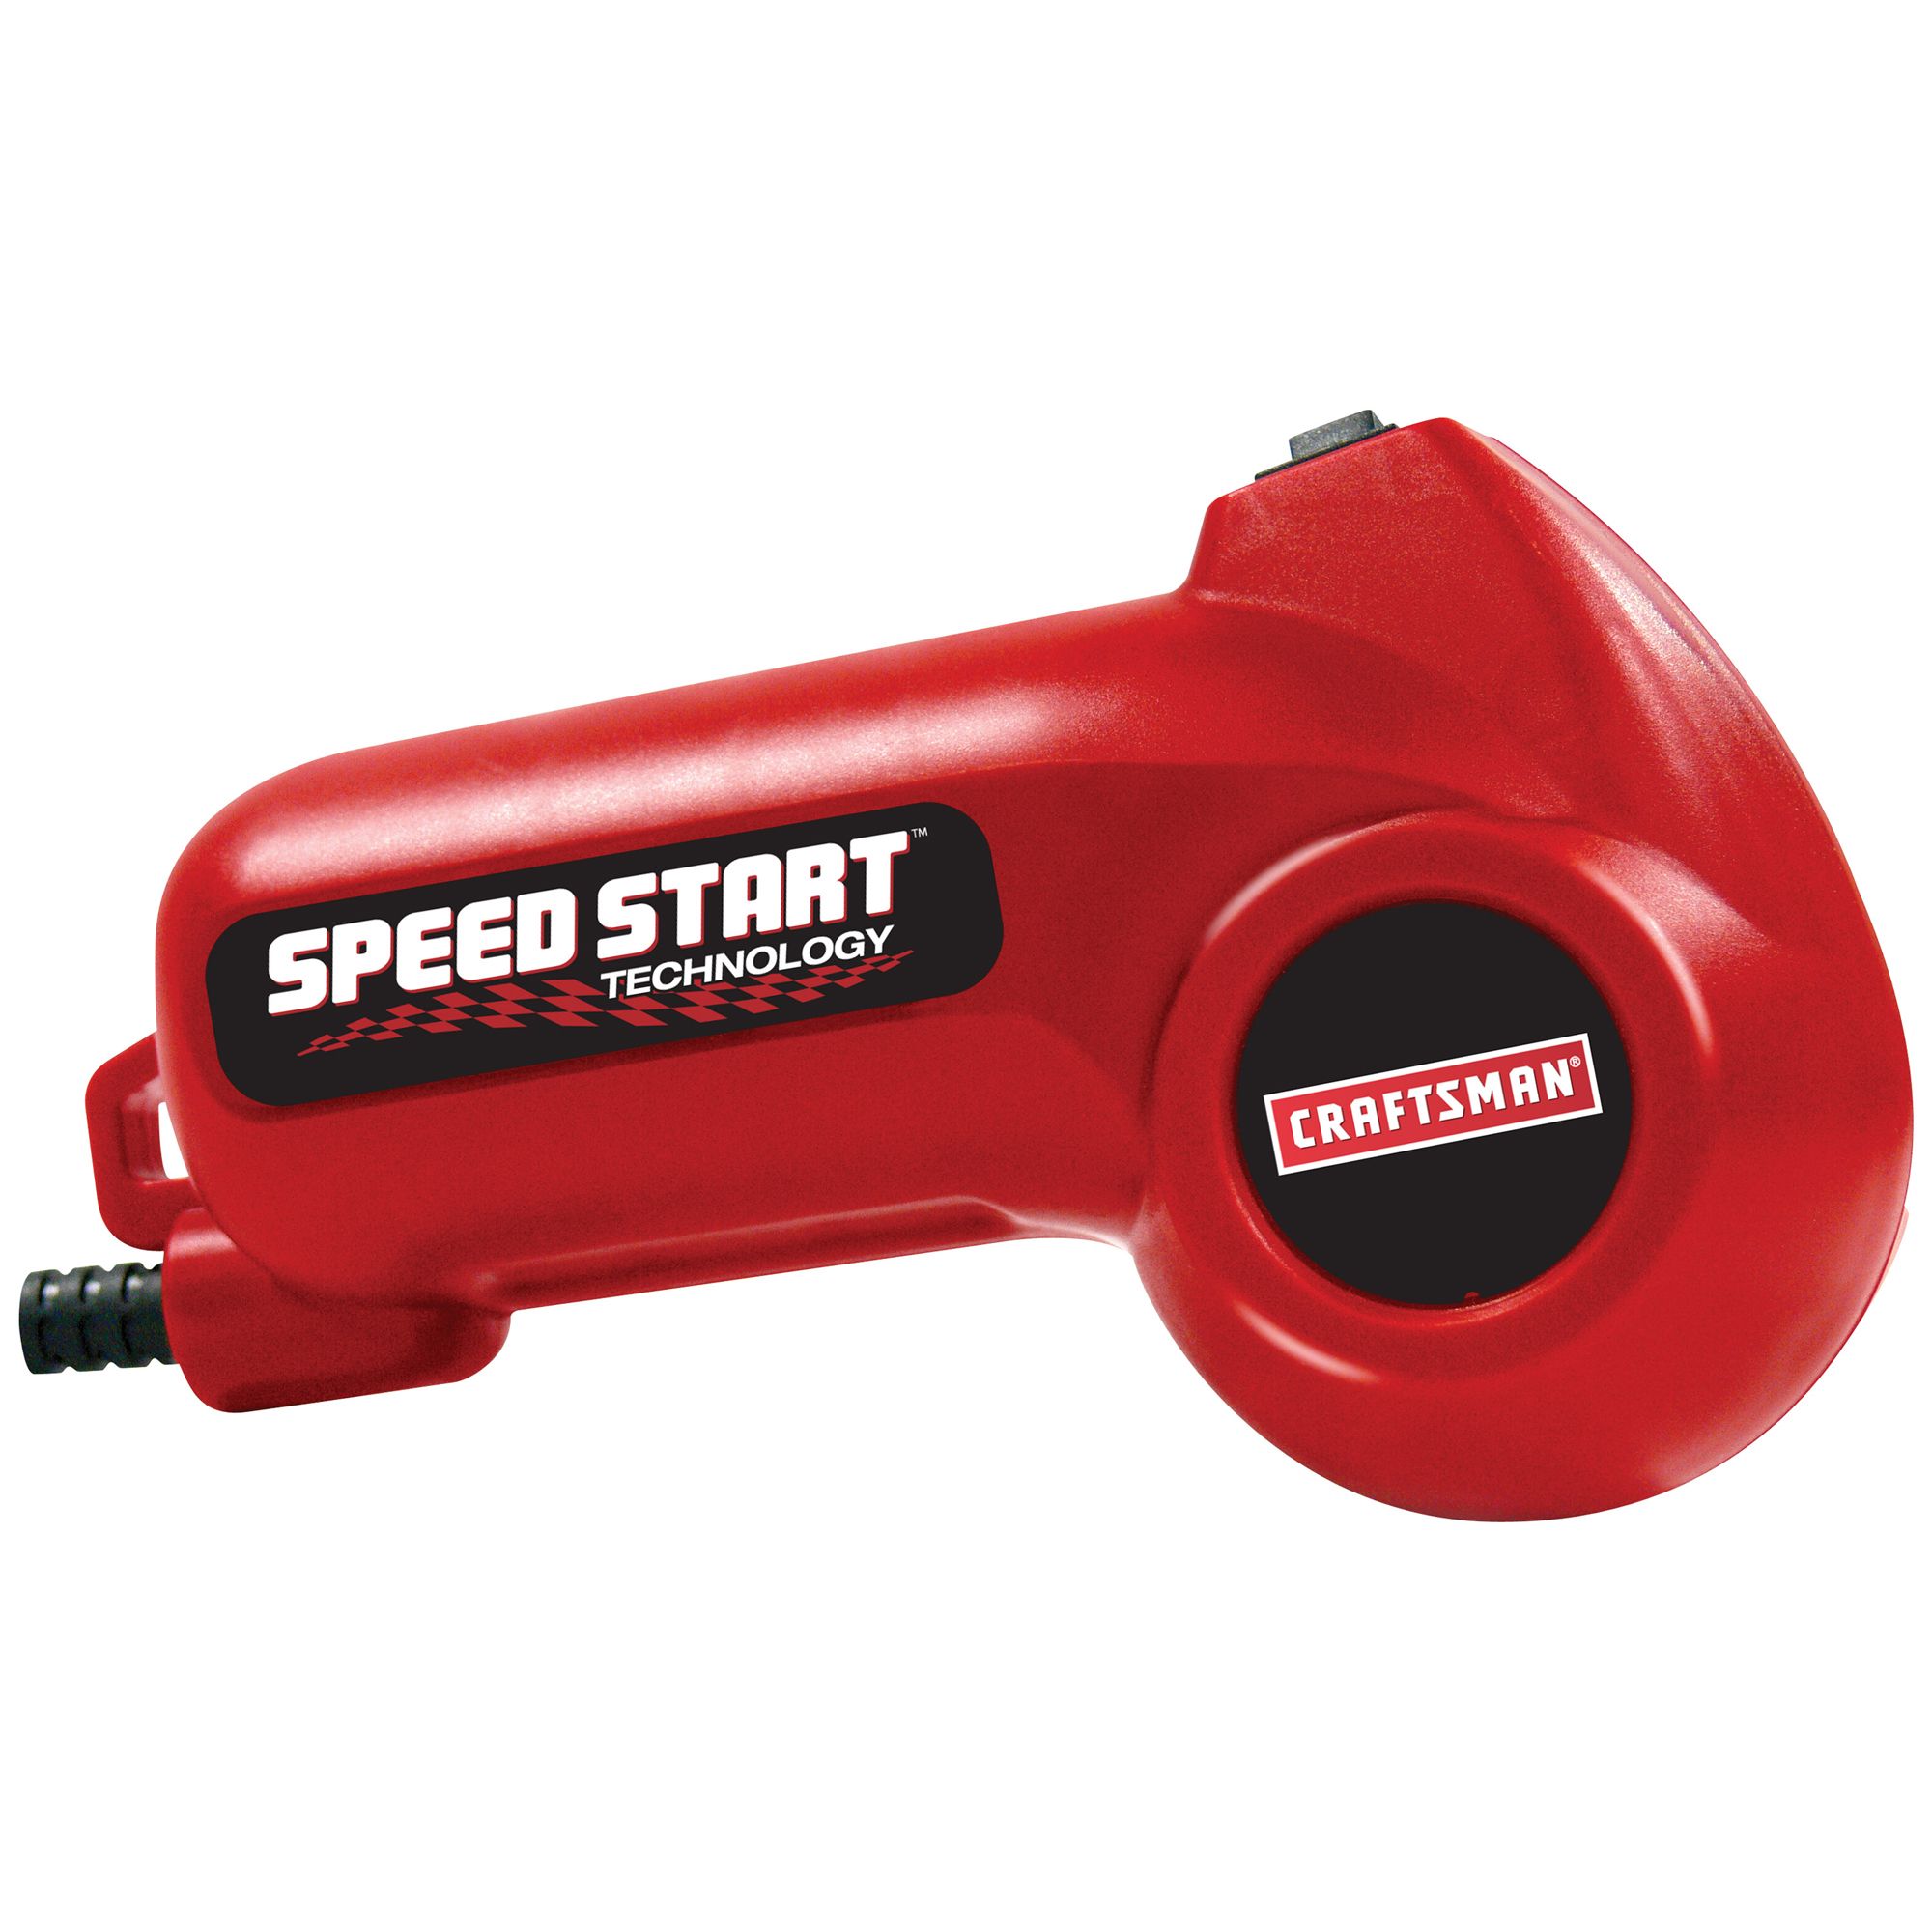 craftsman electric weed eater